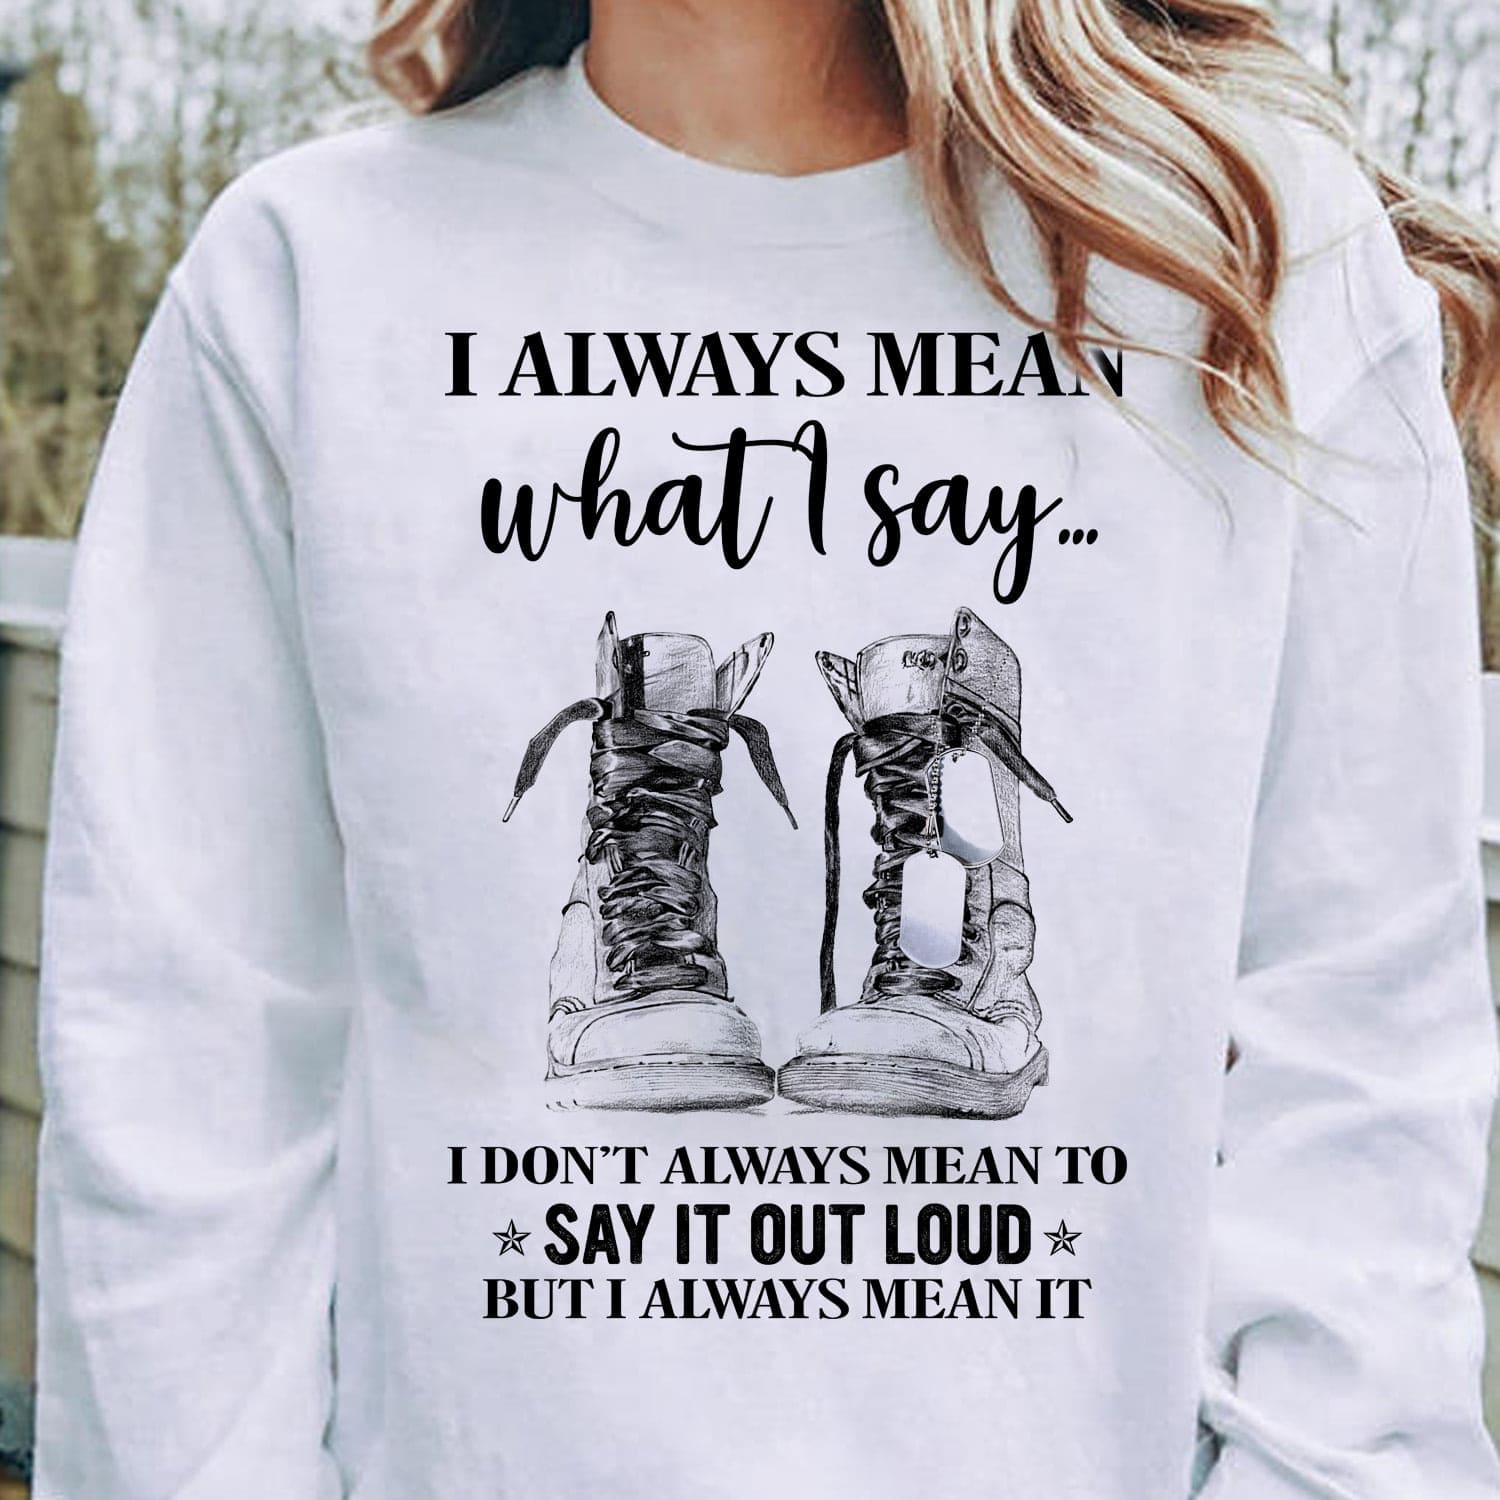 I always mean what I say I don't always mean to say it out loud - High shoes T-shirt